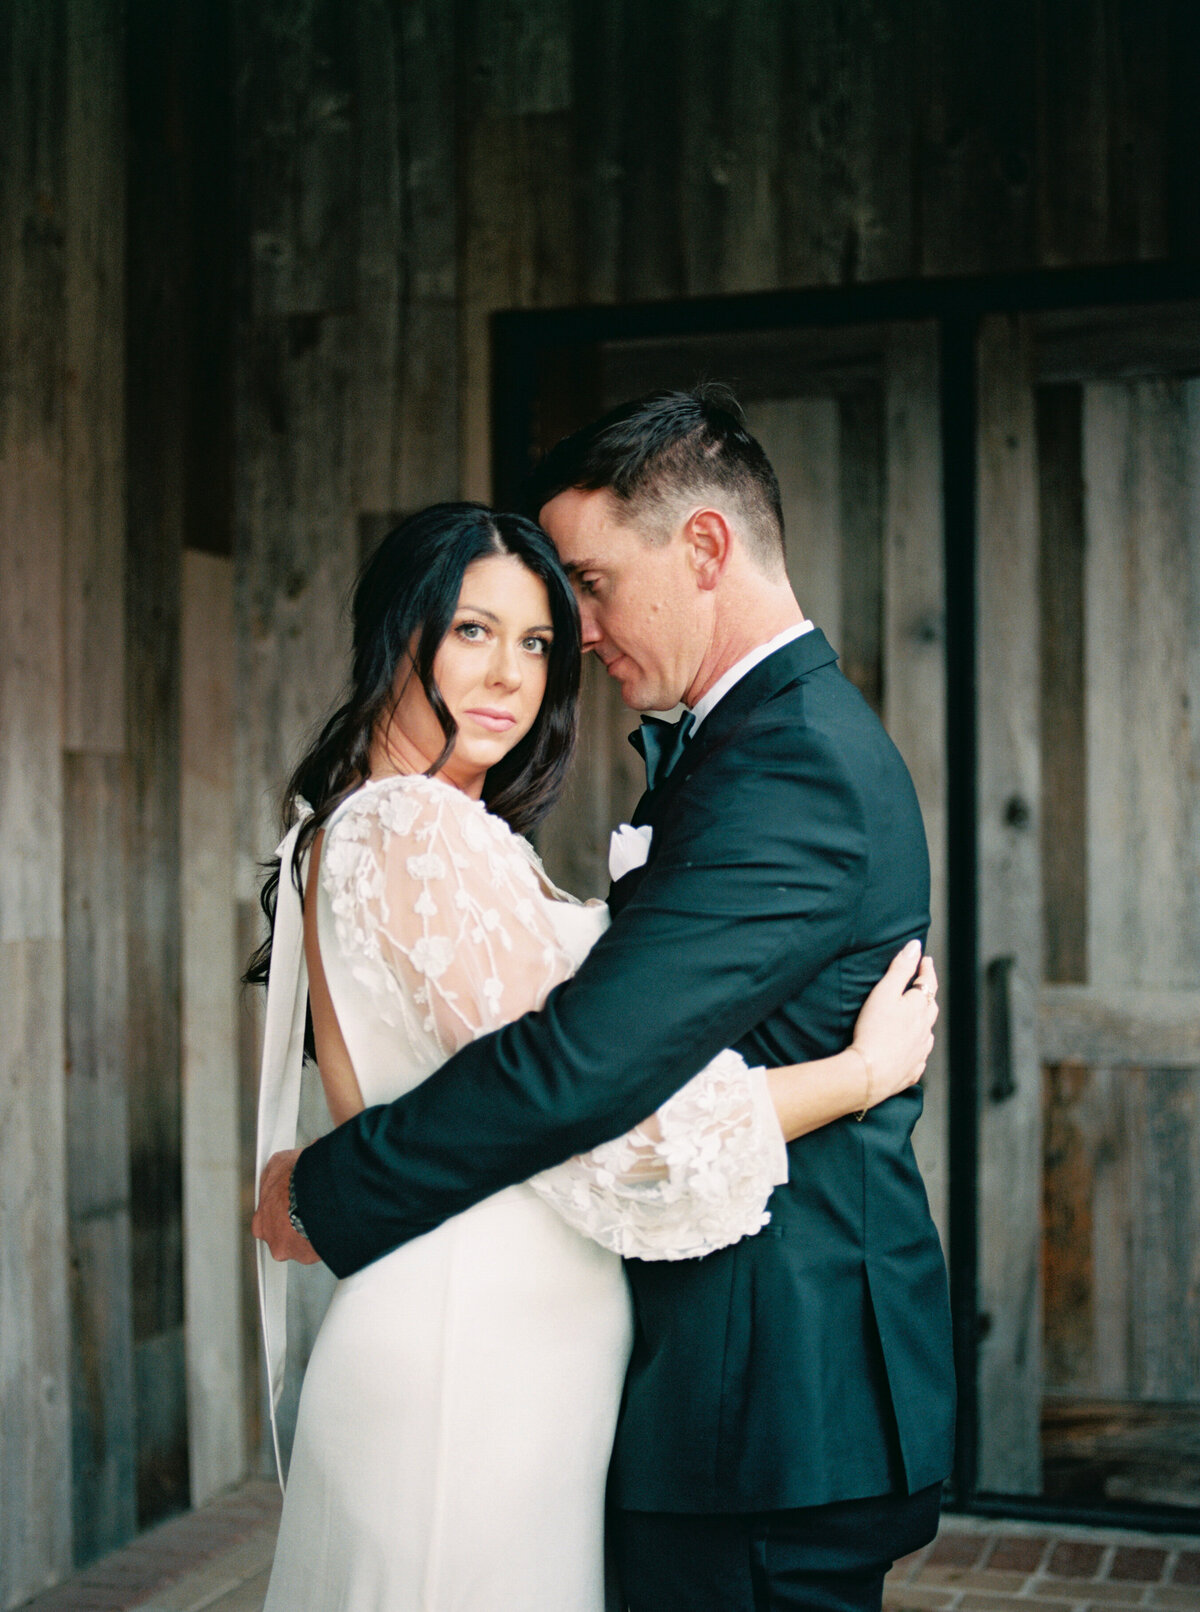 Hotel Drover - Fort Worth Texas - Lauren and Jeff Murray - Stephanie Michelle Photography @stephaniemichellephotog-16-2